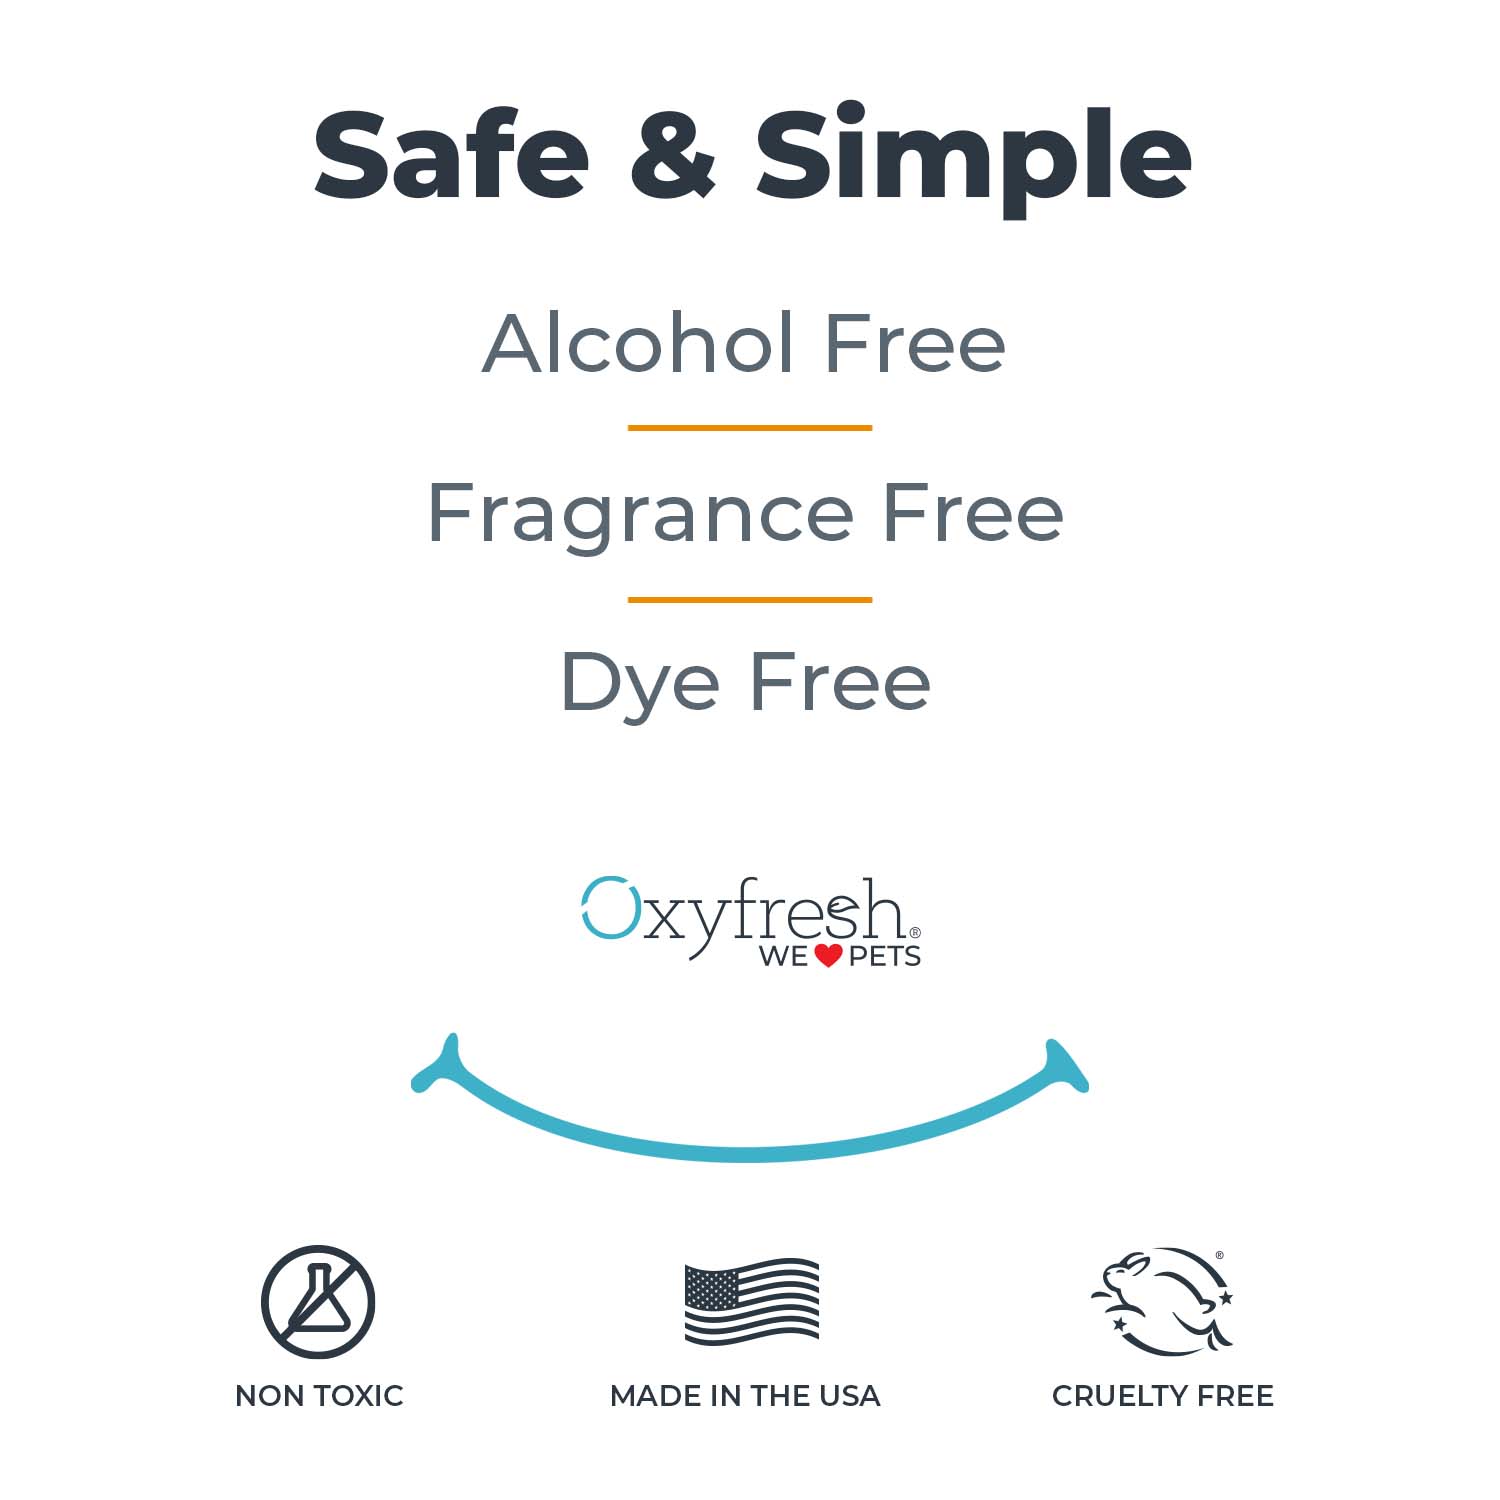 oxyfresh pet water additive graphic that says save & simple alcohol free fragrance free dye free non toxic made in the usa cruelty free